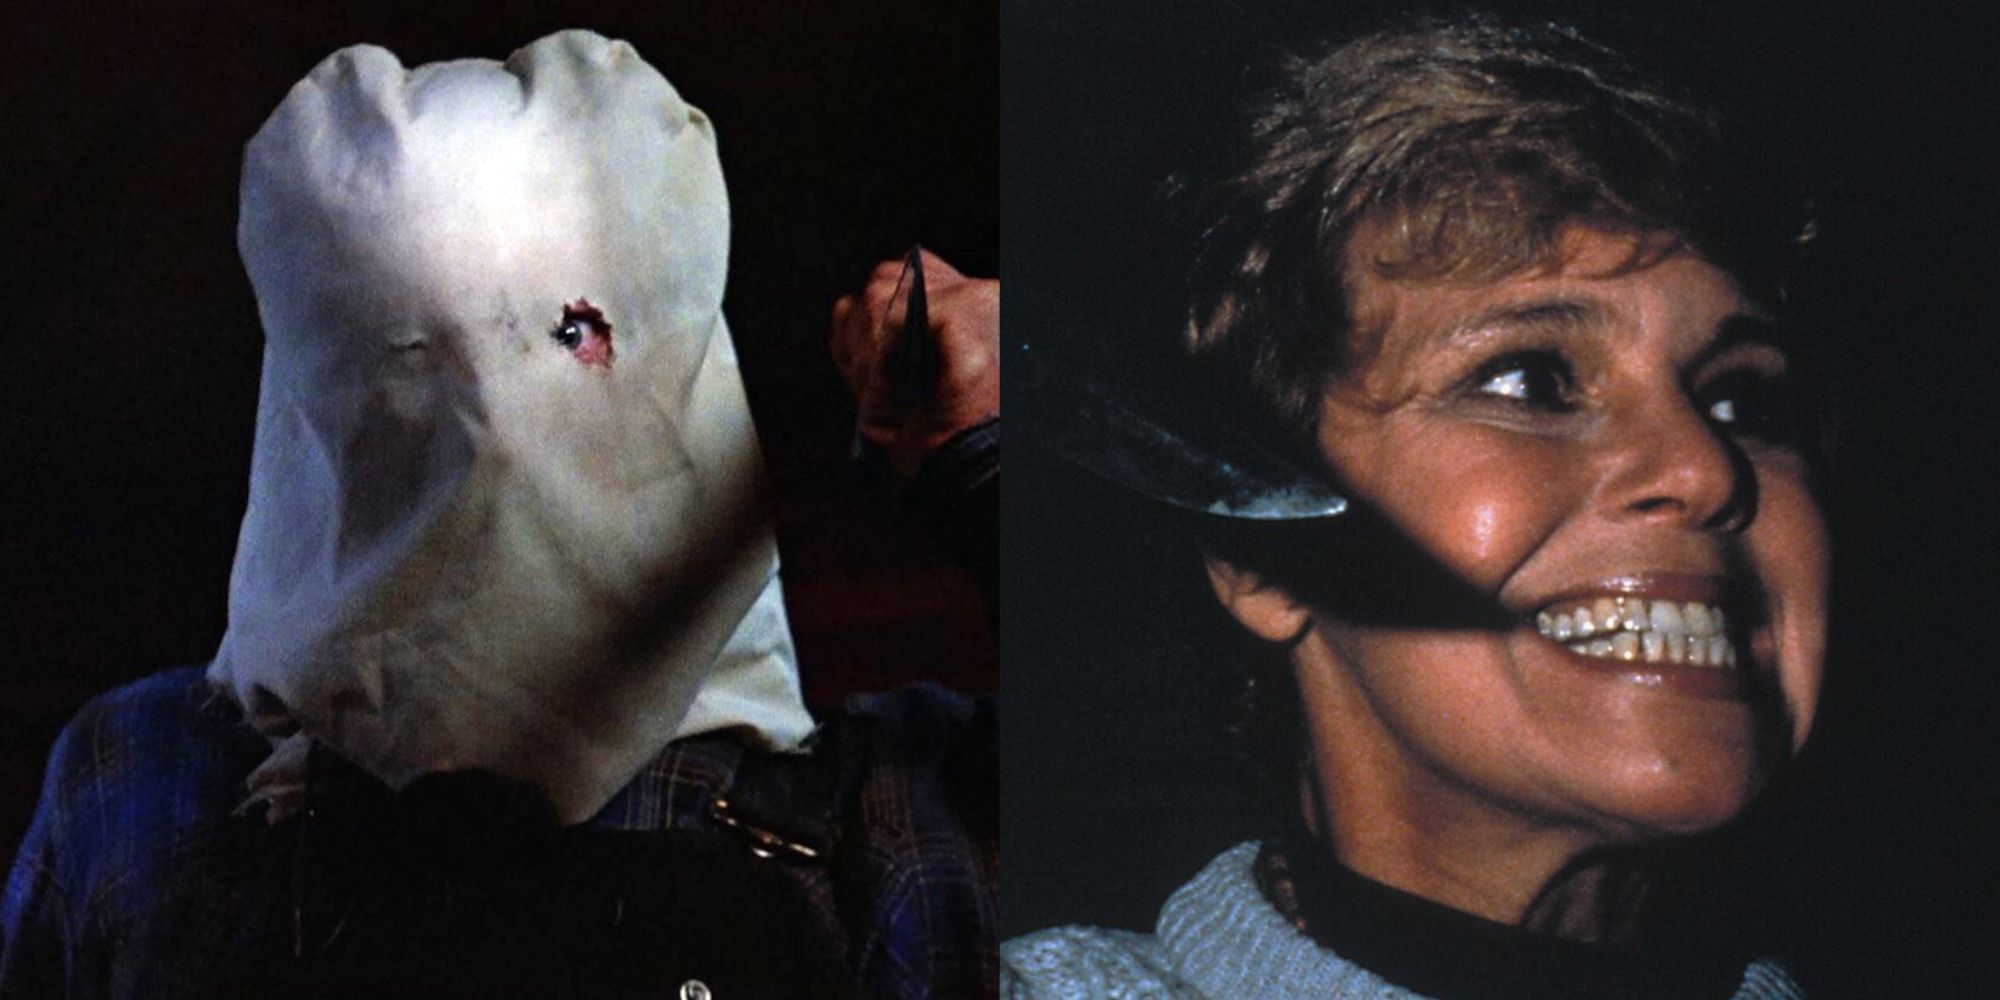 Split image of Jason and Pamela Voorhees in the Friday The 13th movies